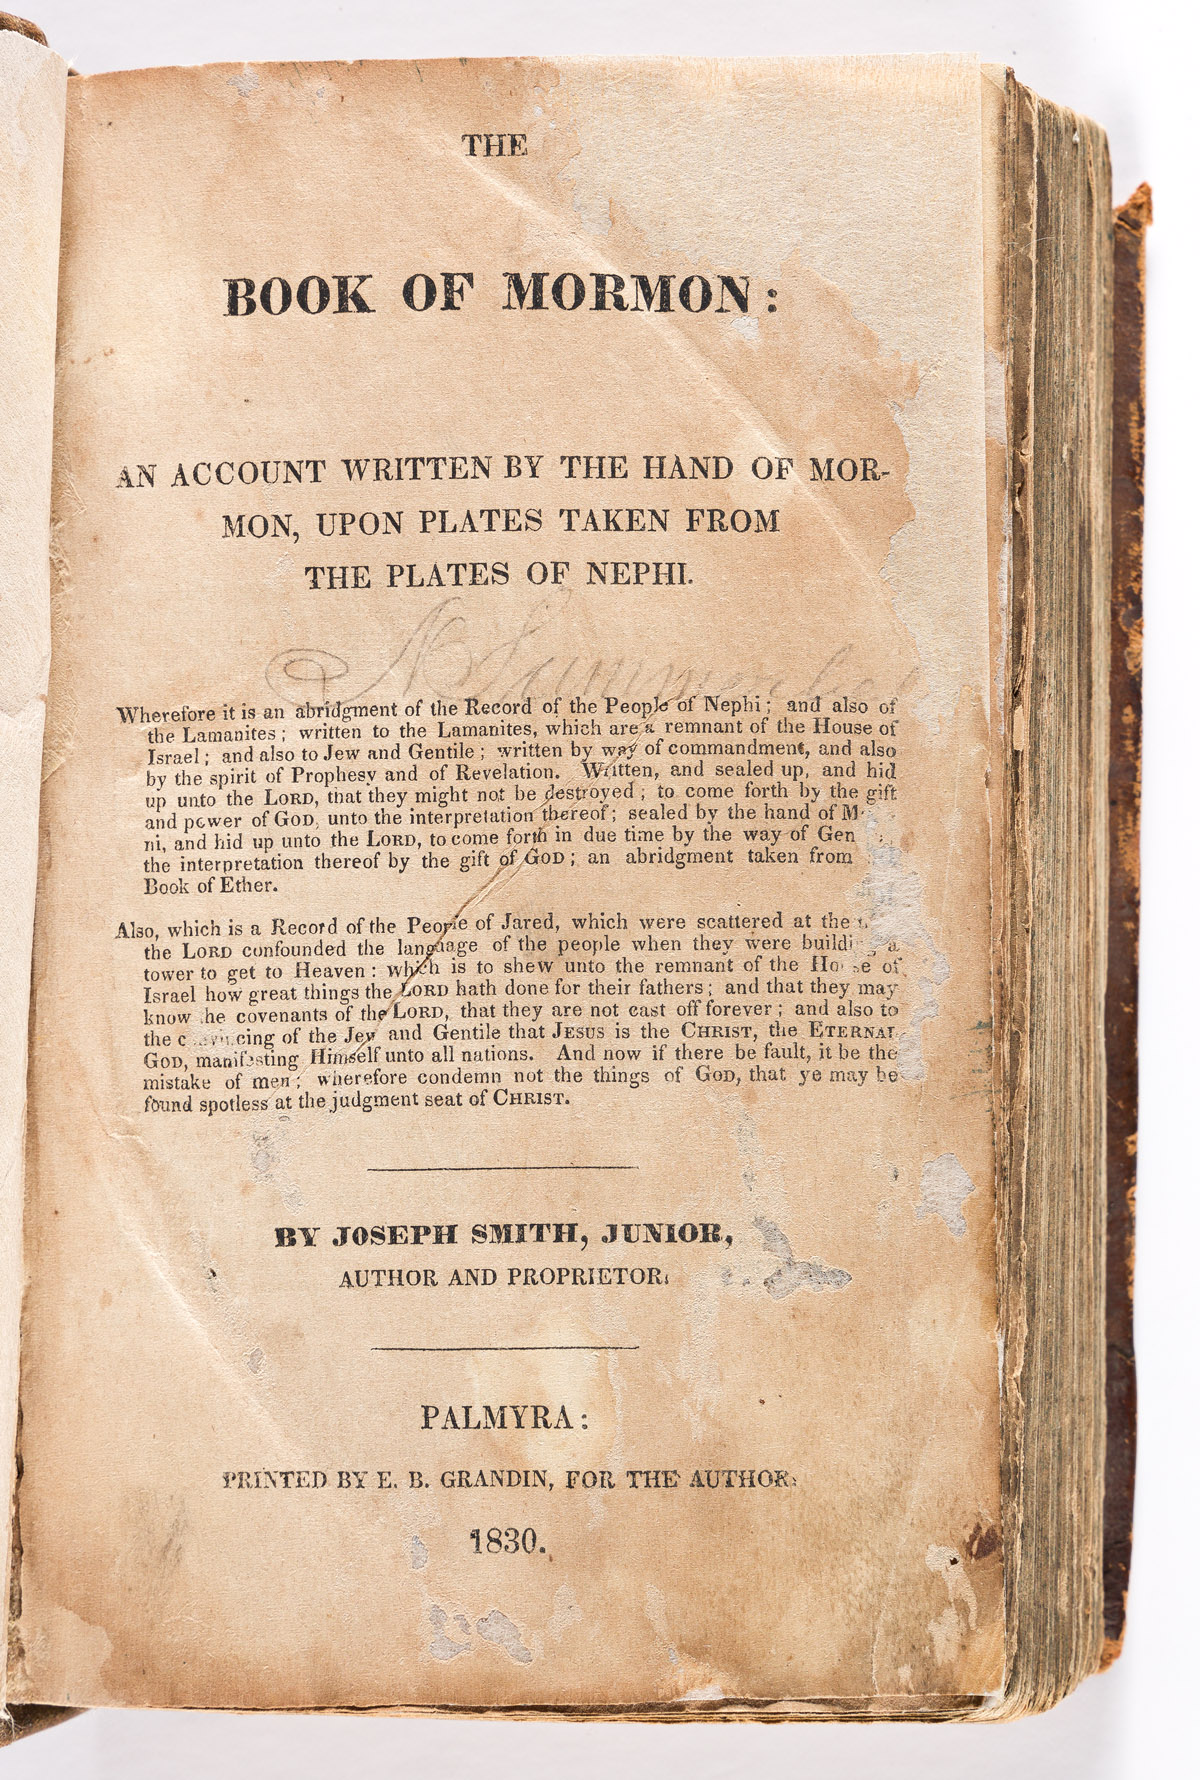 (MORMONS.) The Book of Mormon: An Account Written by the Hand of Mormon, upon Plates Taken from the Plates of Nephi.